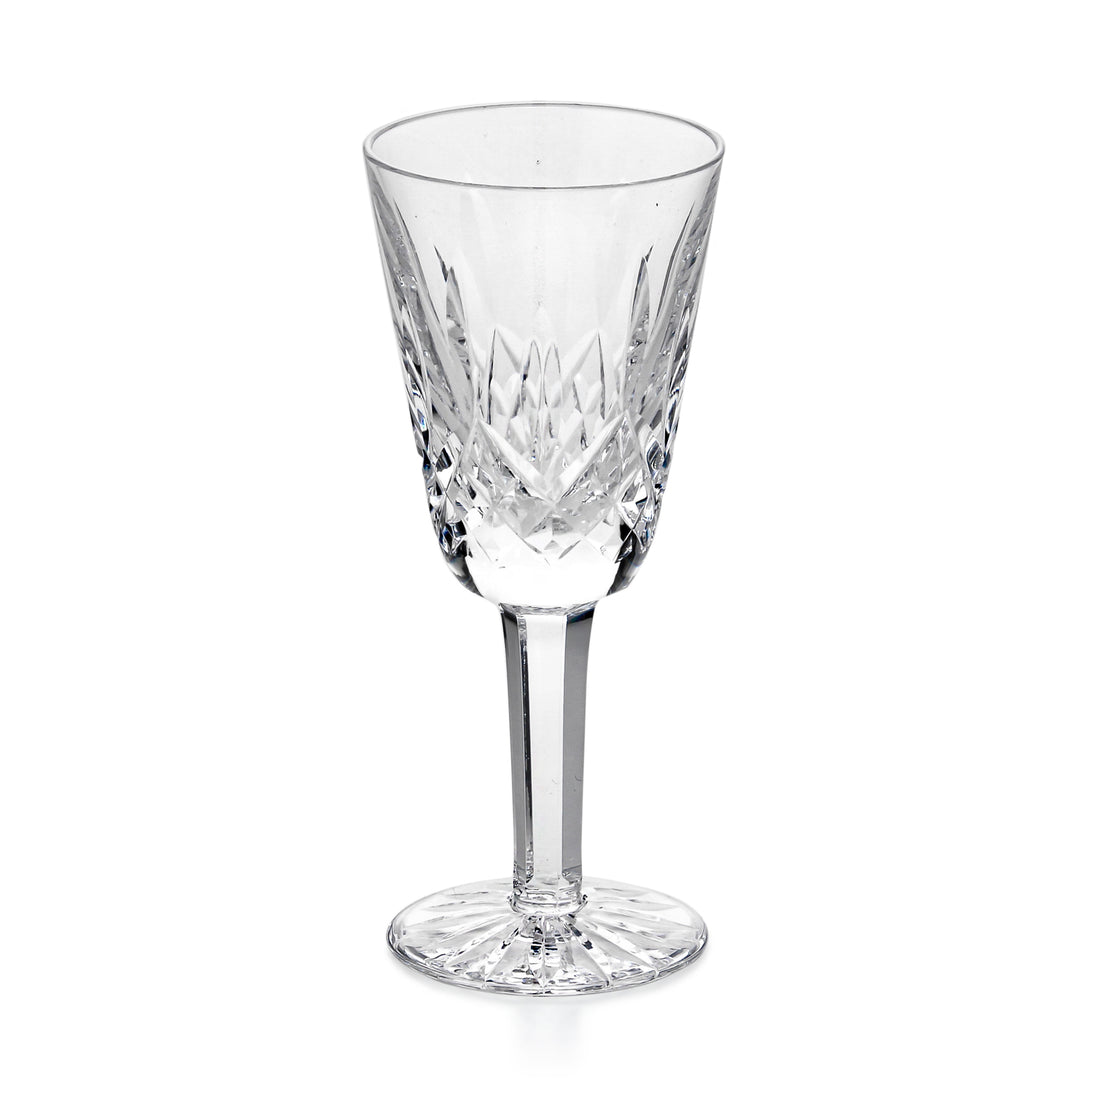 WATERFORD Lismore Sherry Glasses - Set of 5